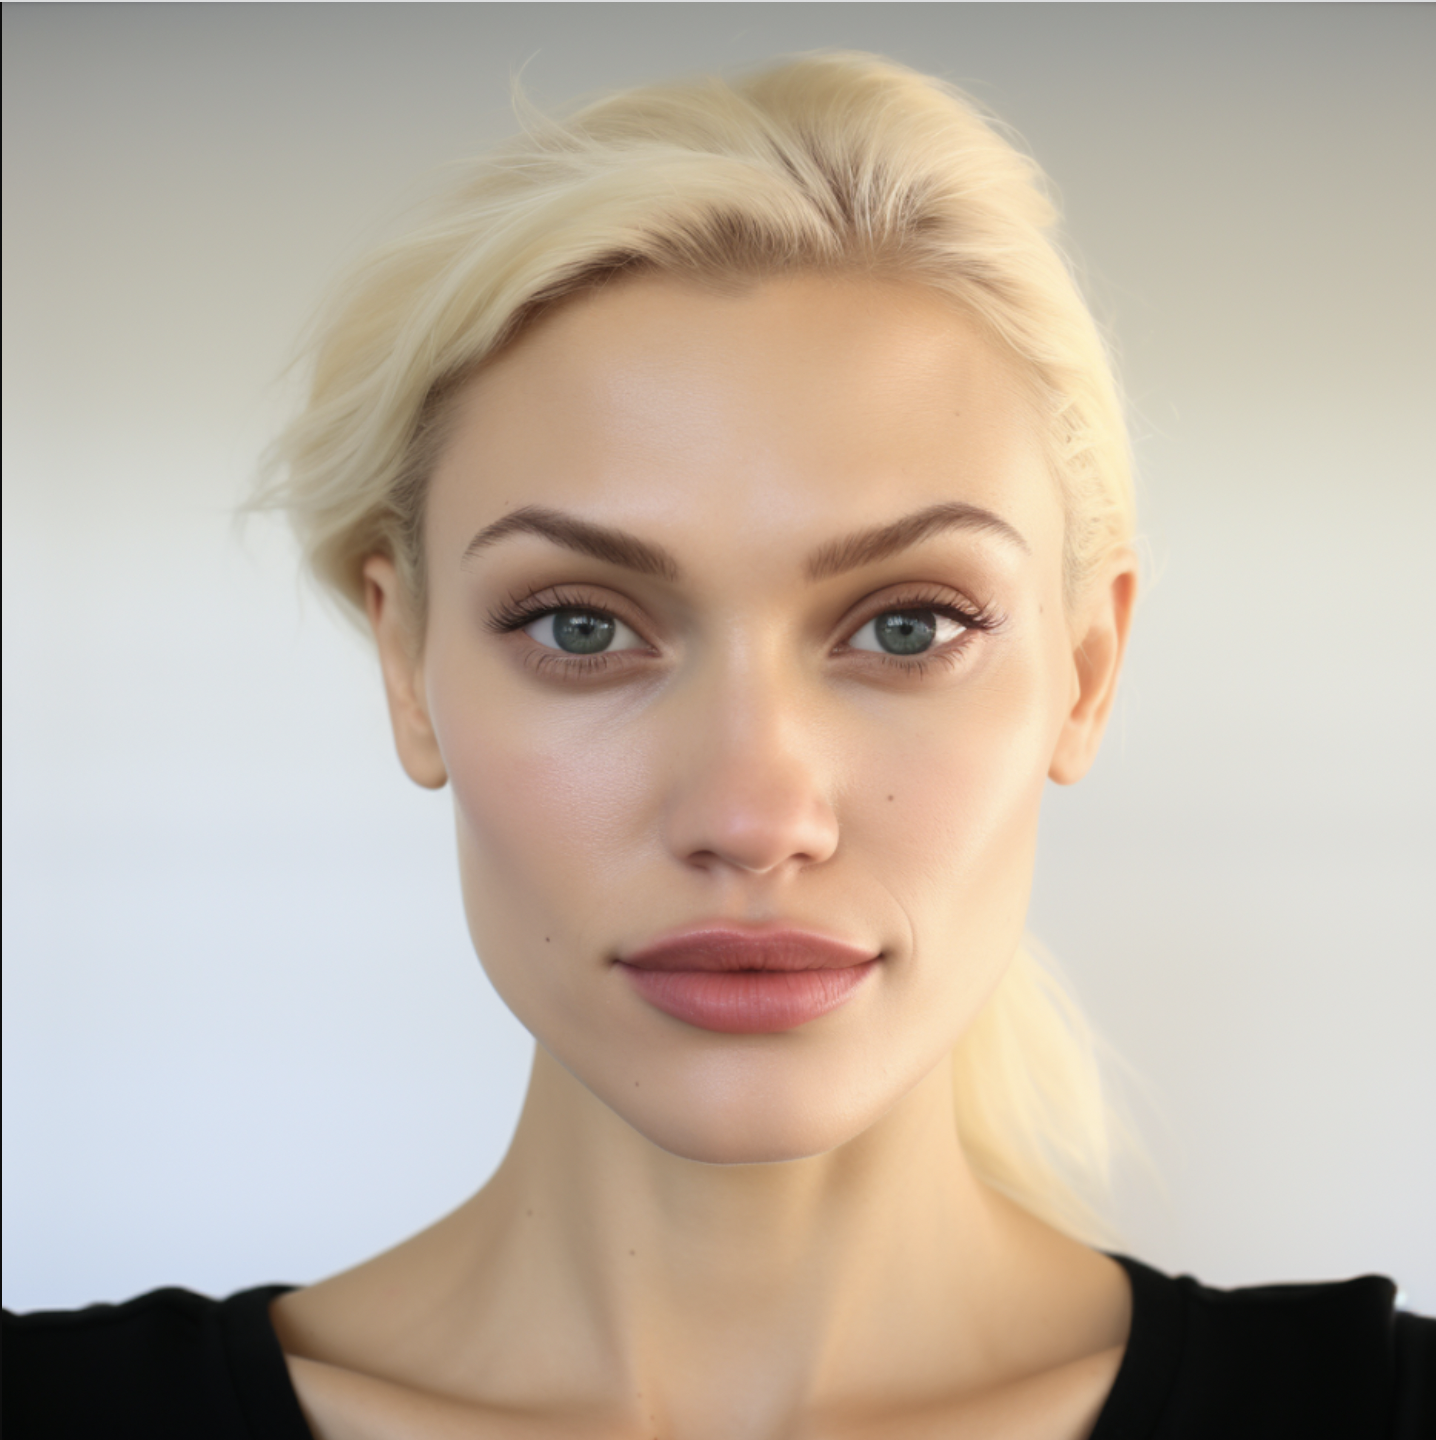 How Gwena Stefani would look with natural make up according to an AI-generated photo | Source: Midjourney